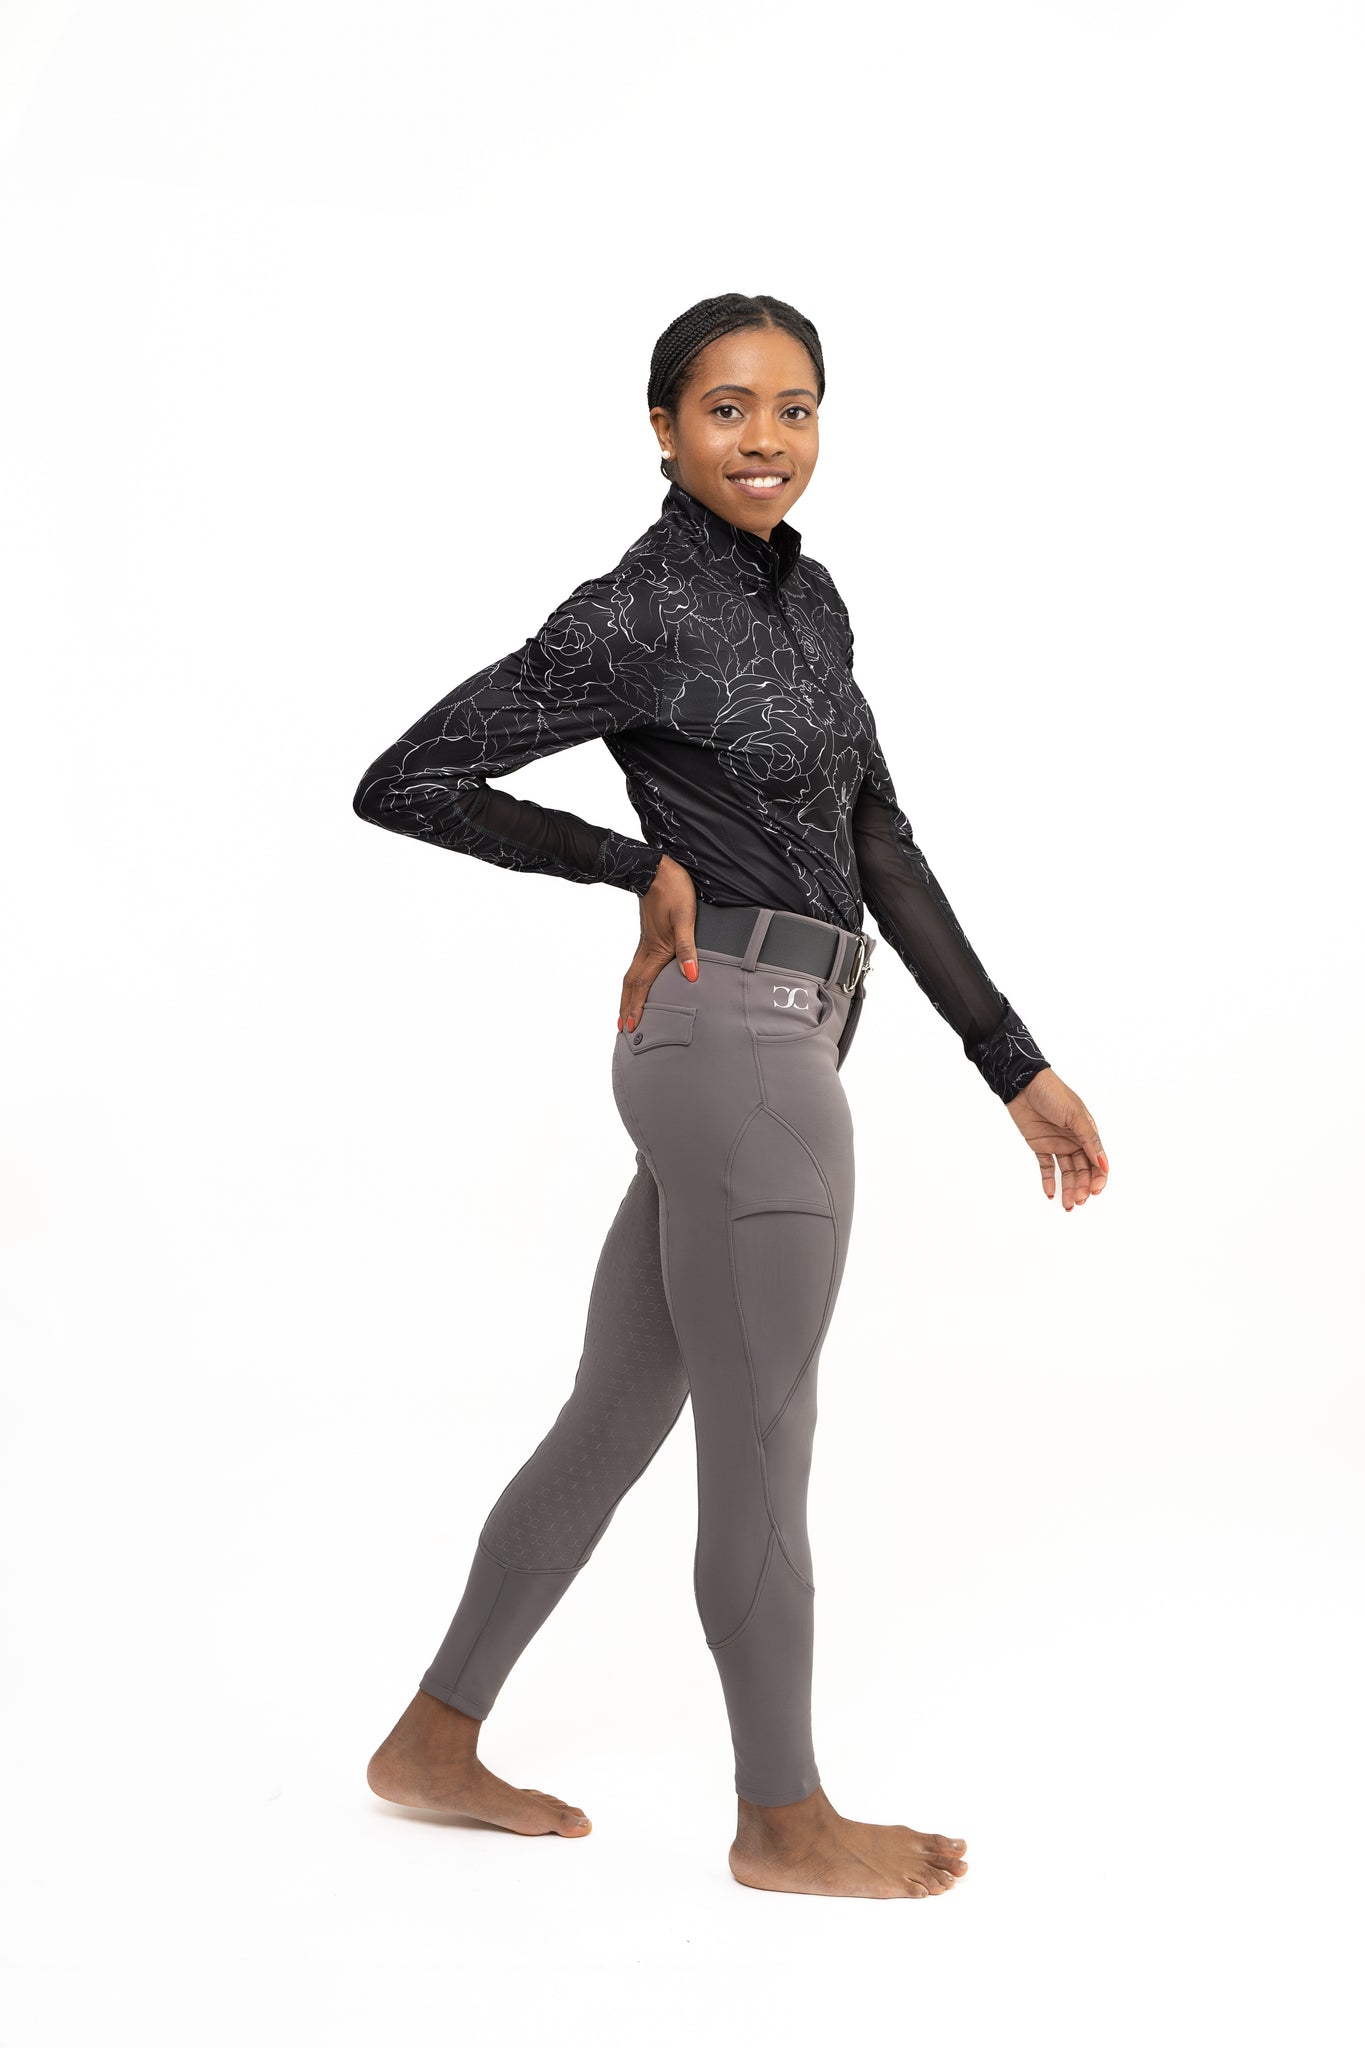 Dove Grey Full Seat Mid-Weight Winter Breeches-4 Way Stretch in Thick and Cozy Fabric